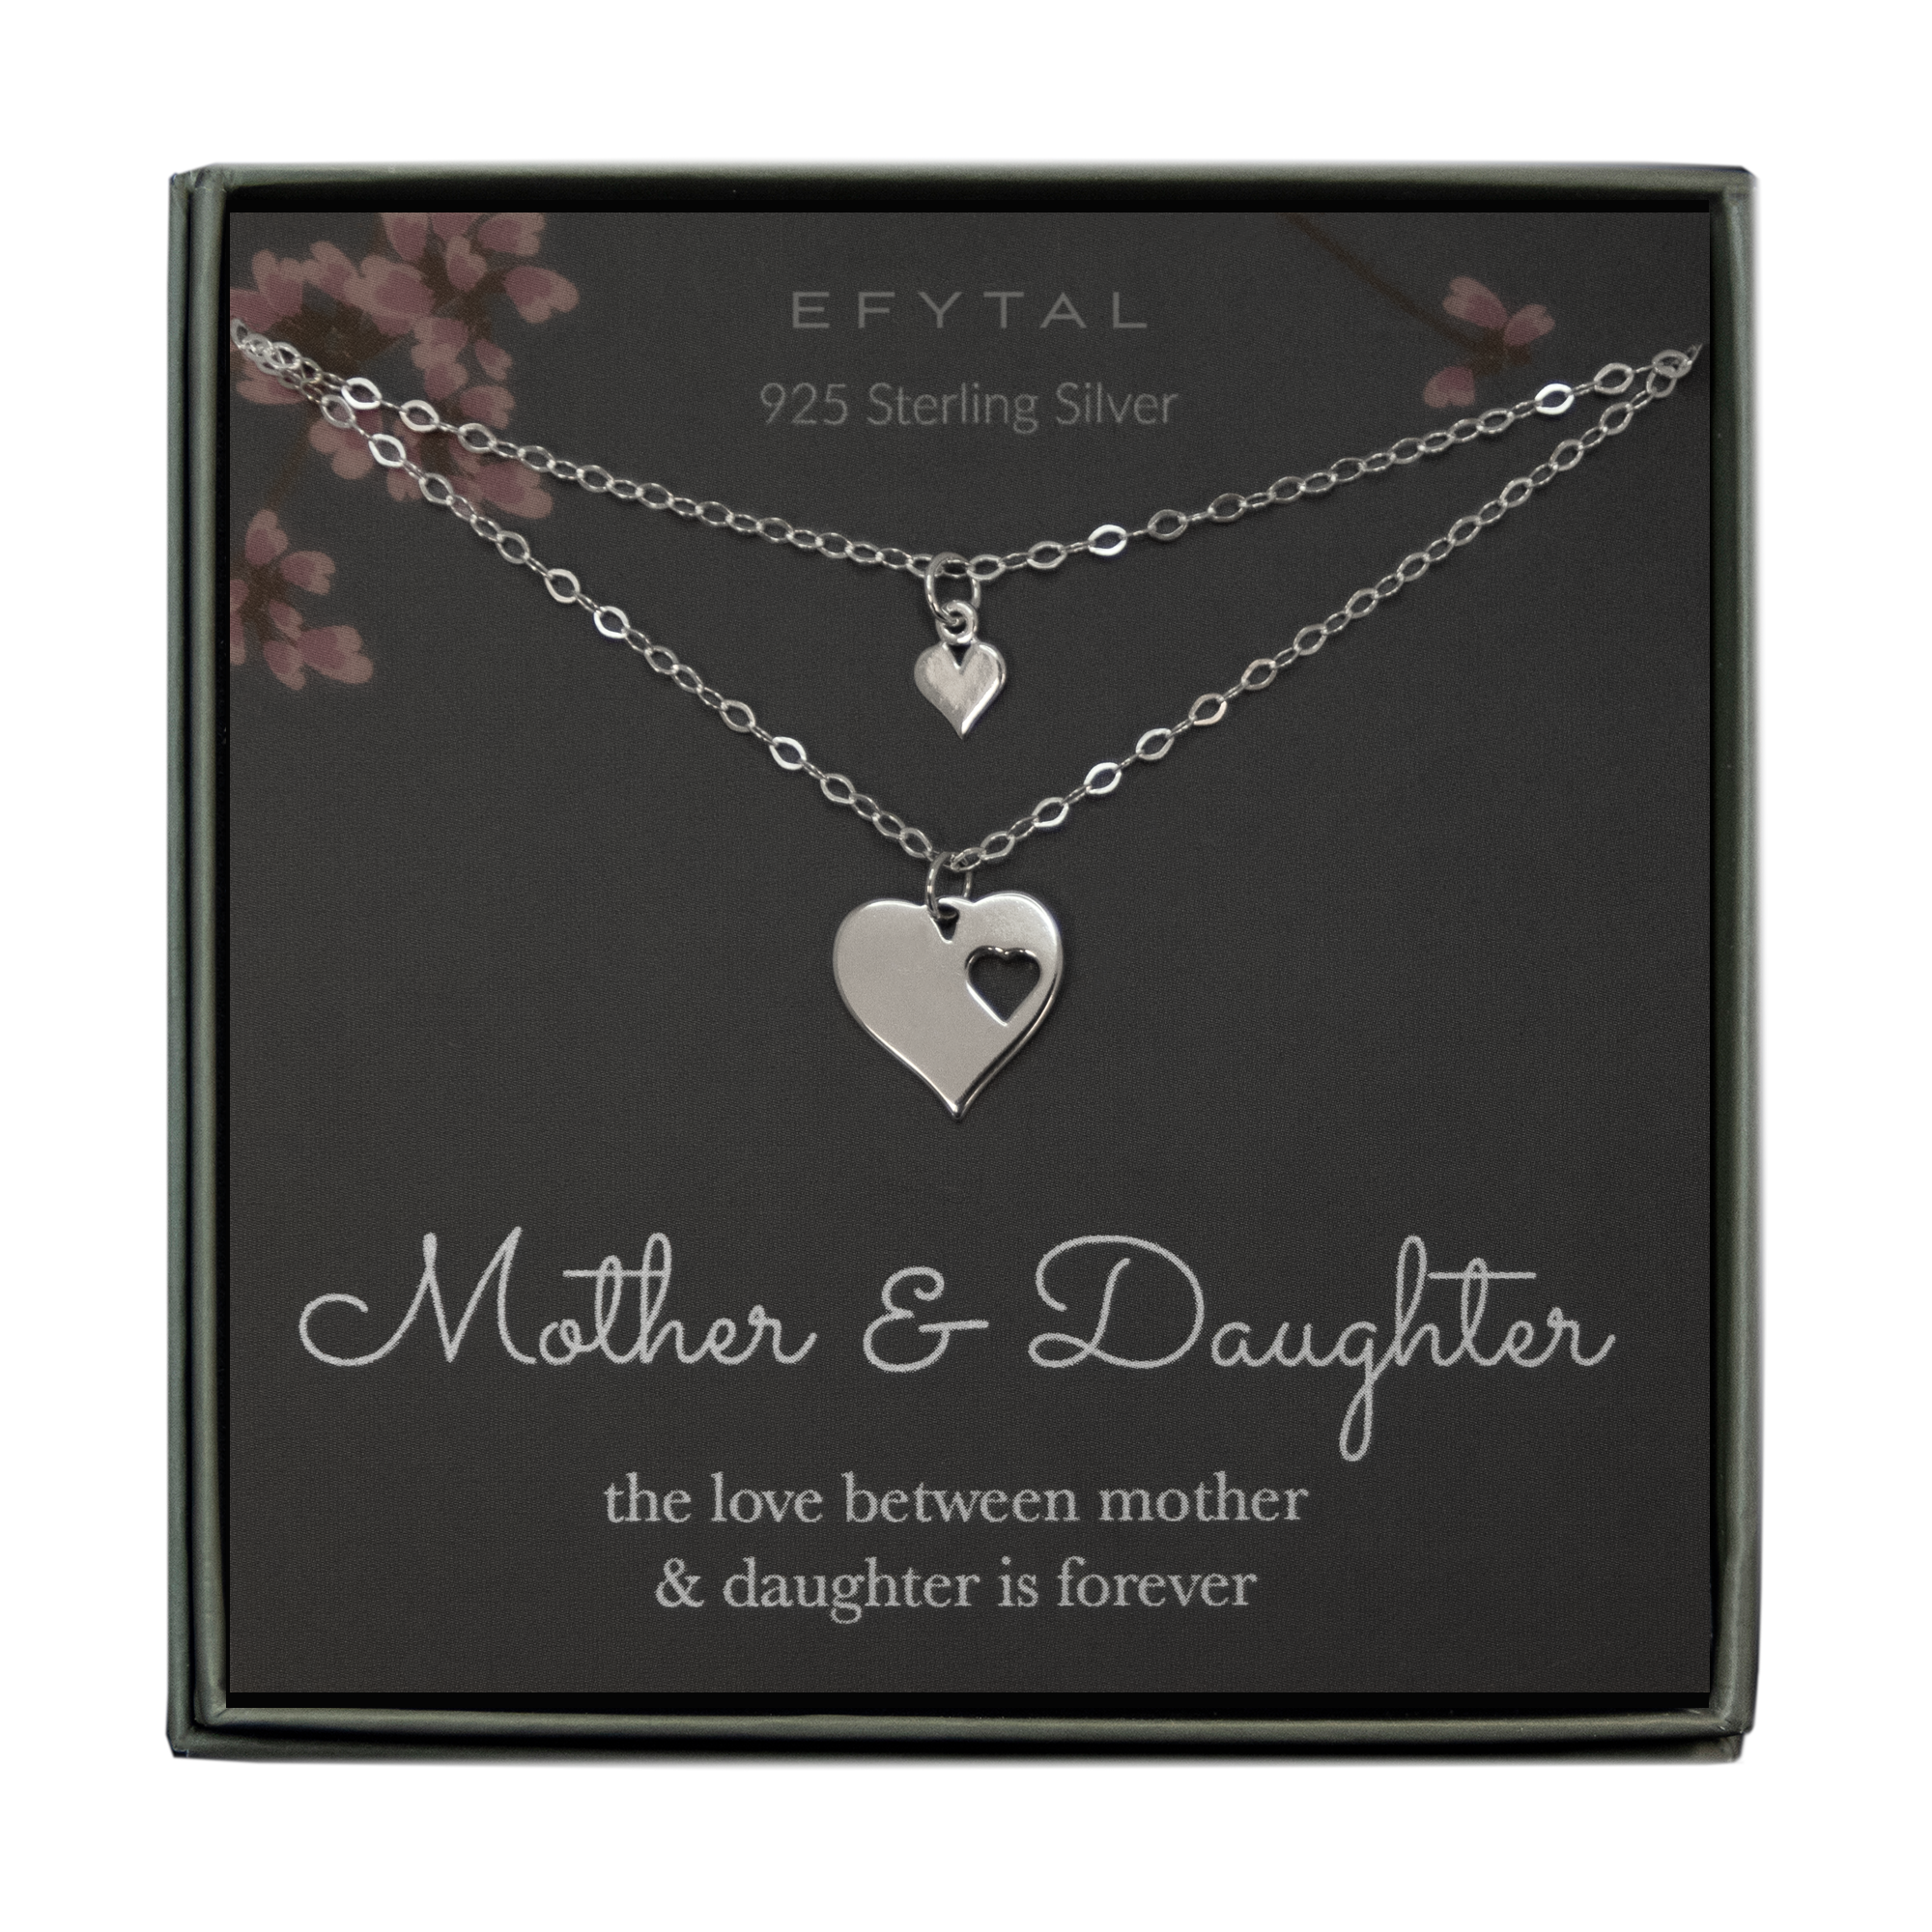 sherri mother-daughter hearts, set of two • mother & daughter